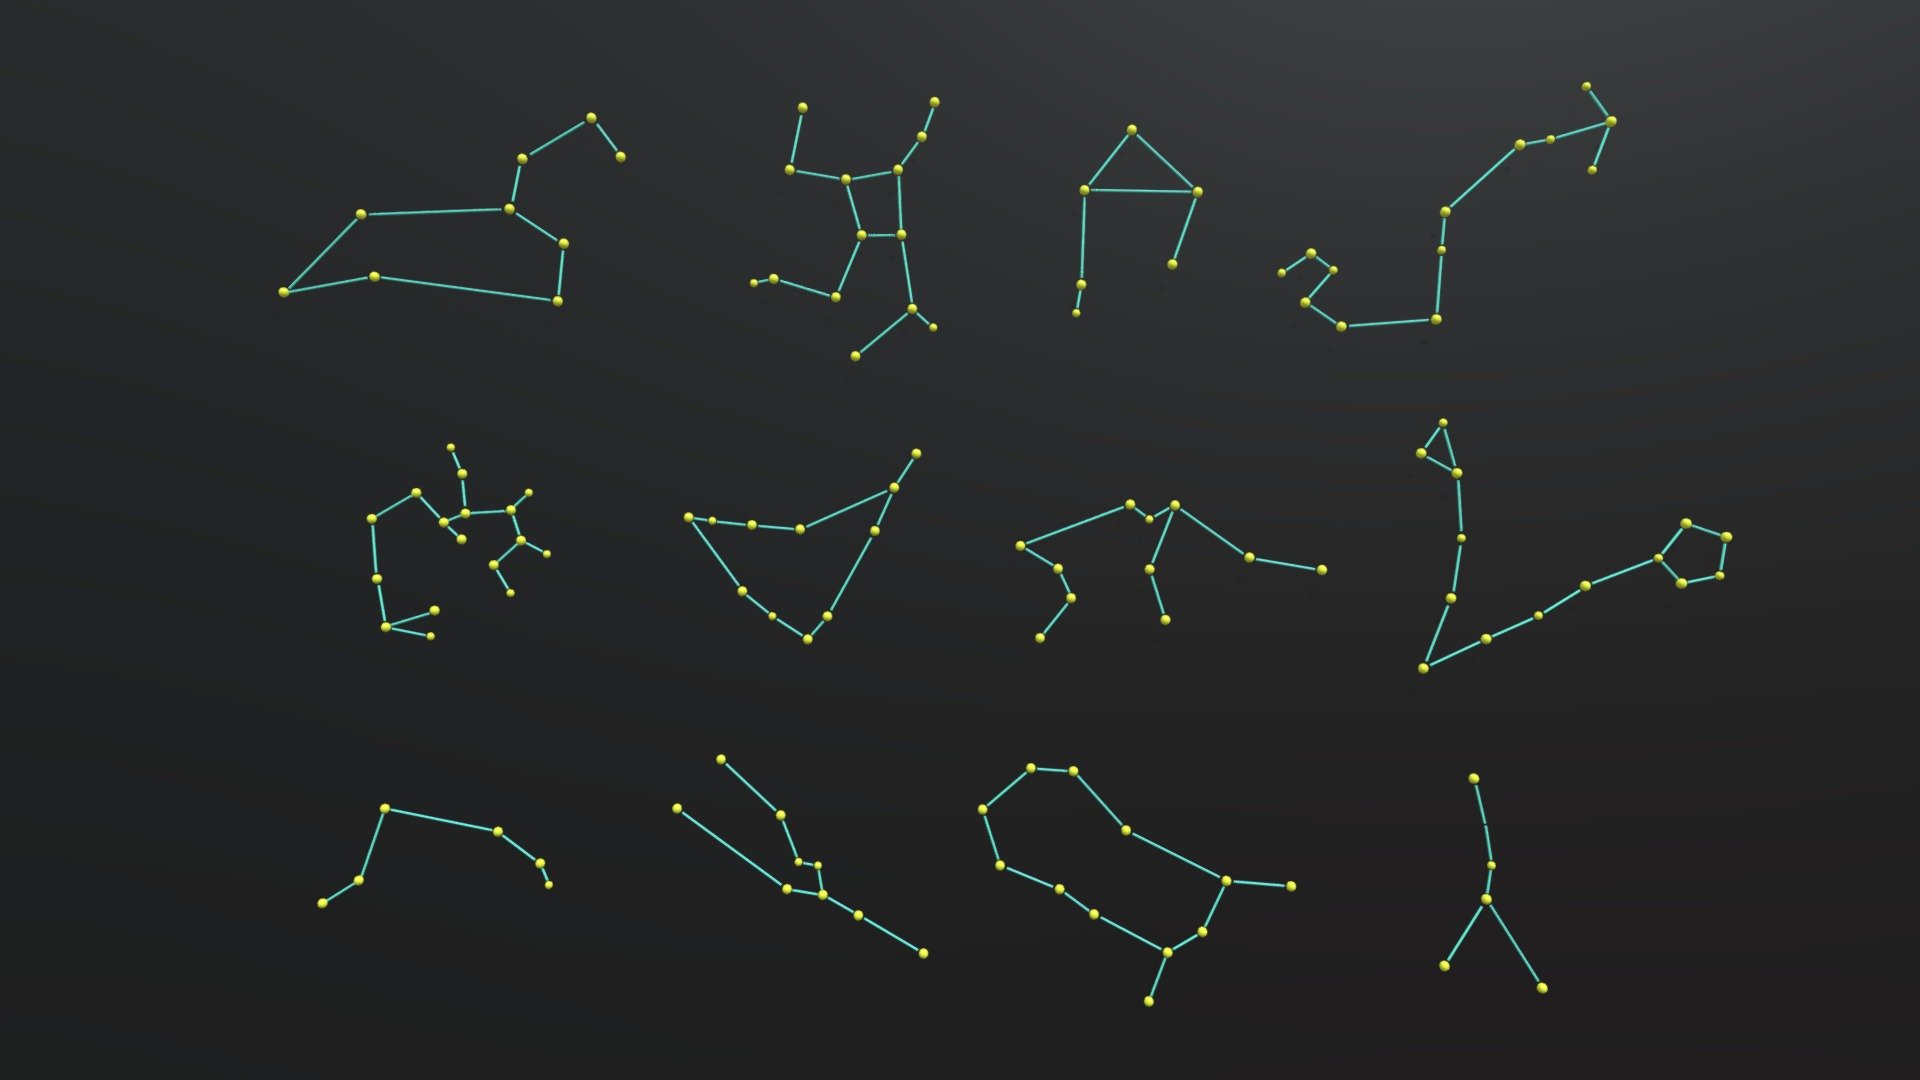 -12 Horoscope Zodiac Constellation Pack.

-This file contains 263 objects.

-Verts : 65,150 Faces : 63,174.

-Materials and objects have the correct names.

-This product was created in Blender 3.0.

-Formats: blend, fbx, obj, c4d, dae, abc, stl, glb,unitypackage.

-We hope you enjoy this model.

-Thank you 3d model